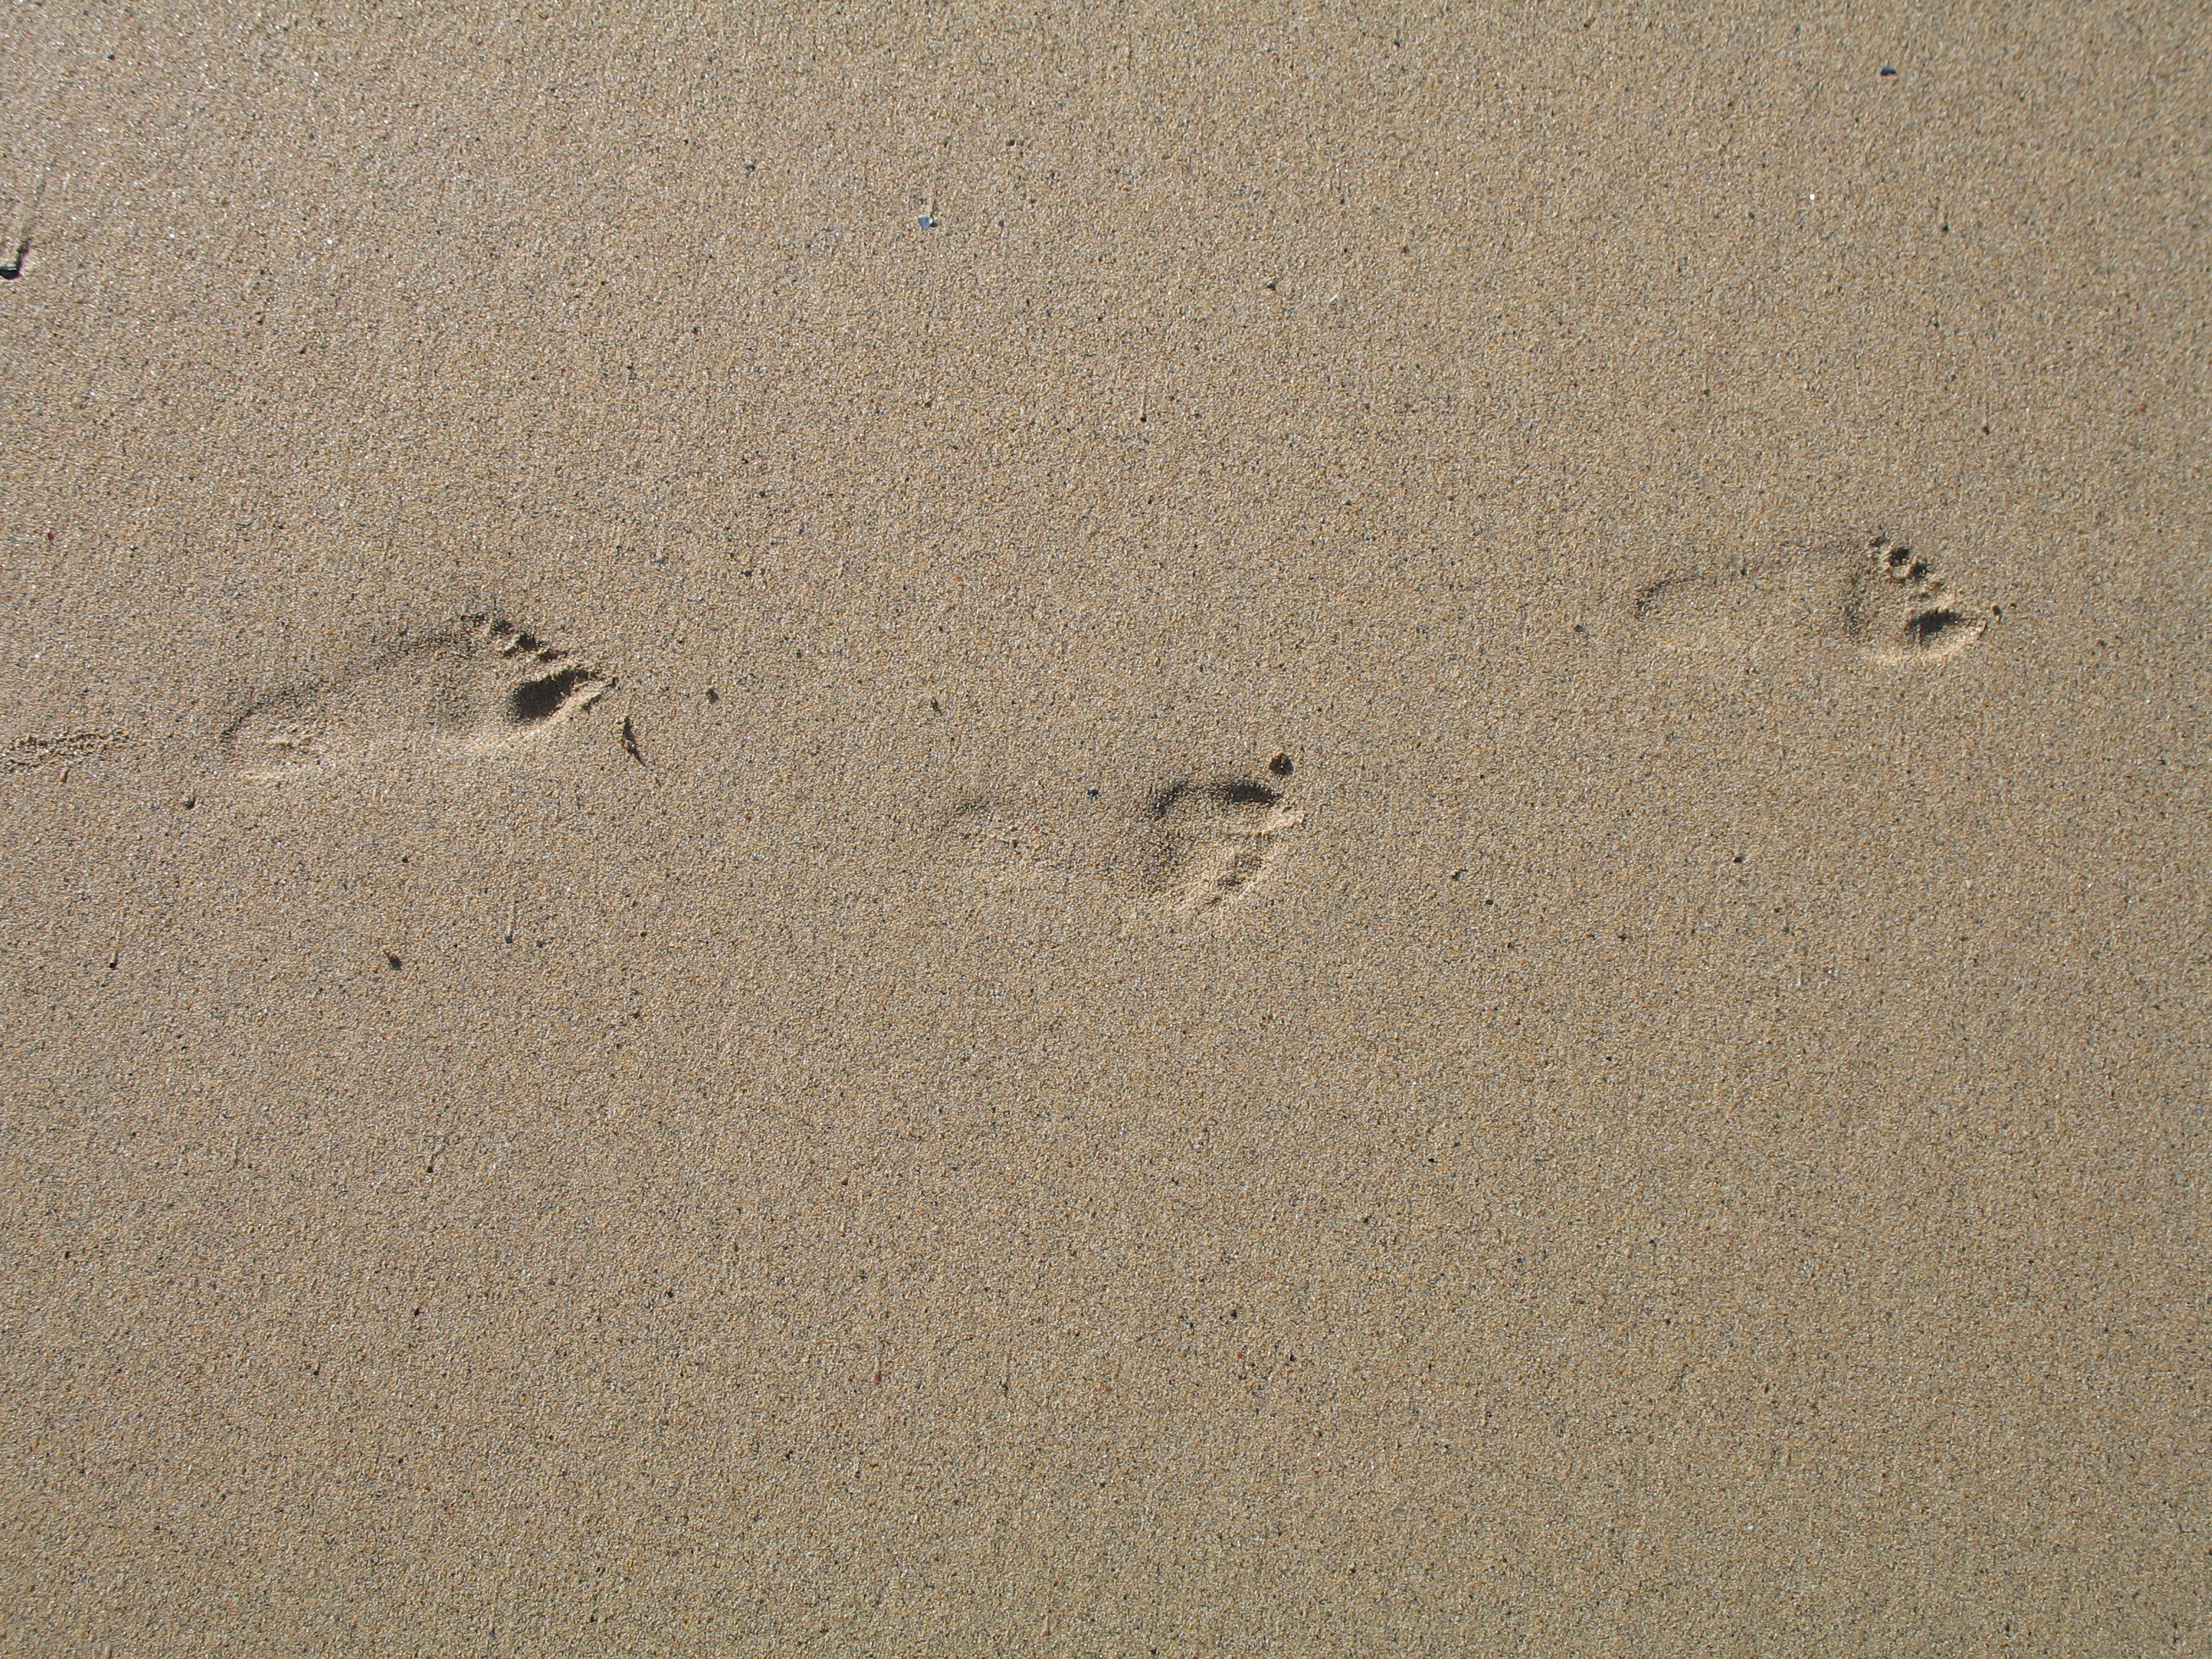 A child's footprints in the sand